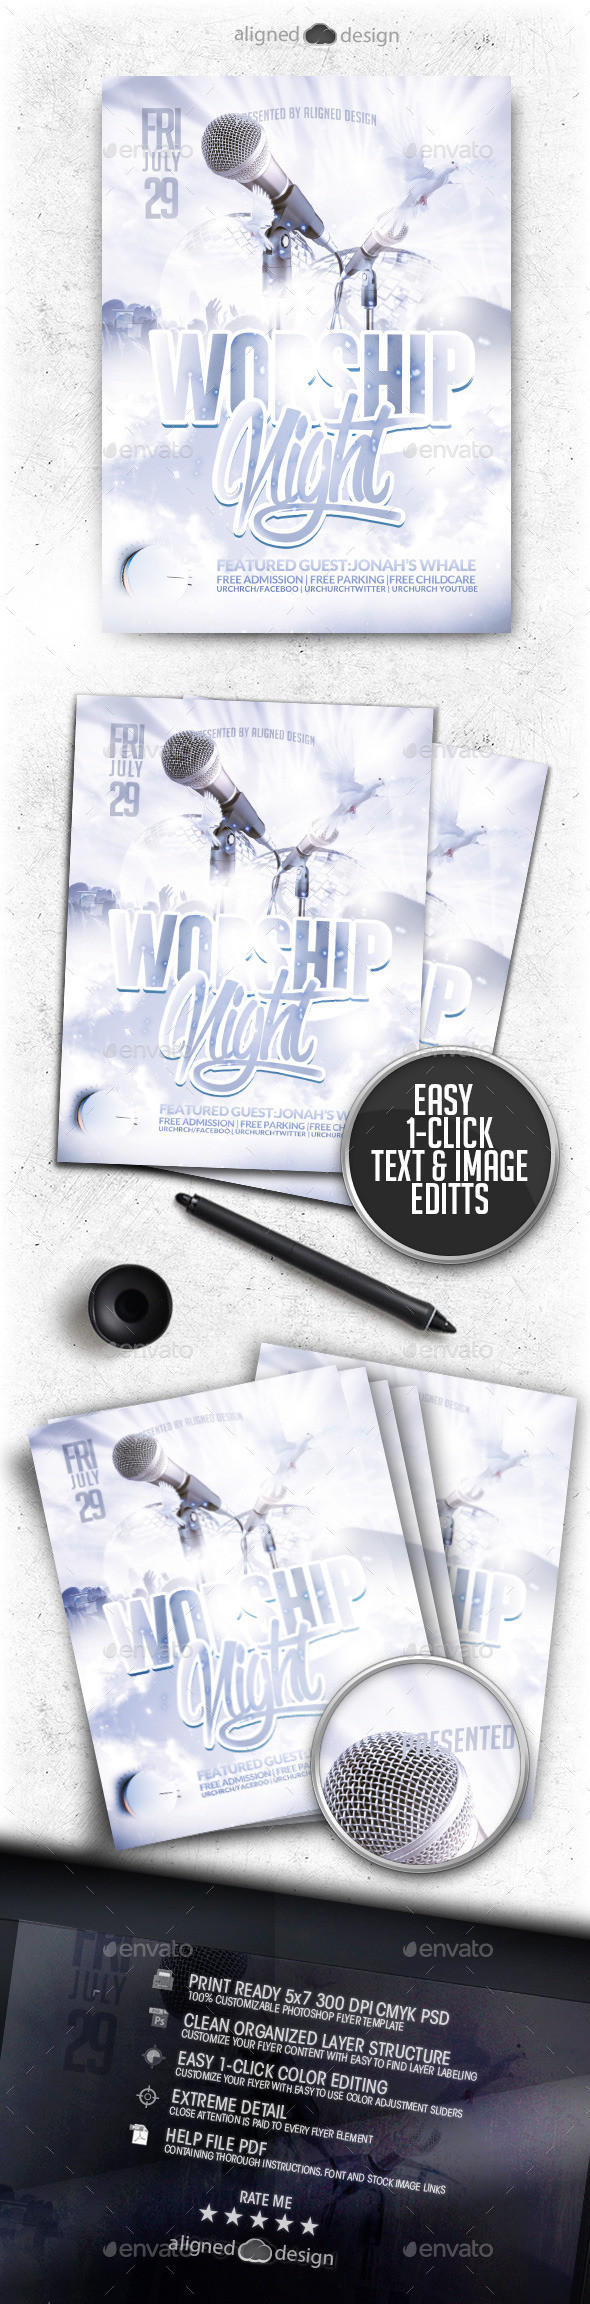 Preview worship night white flyer template